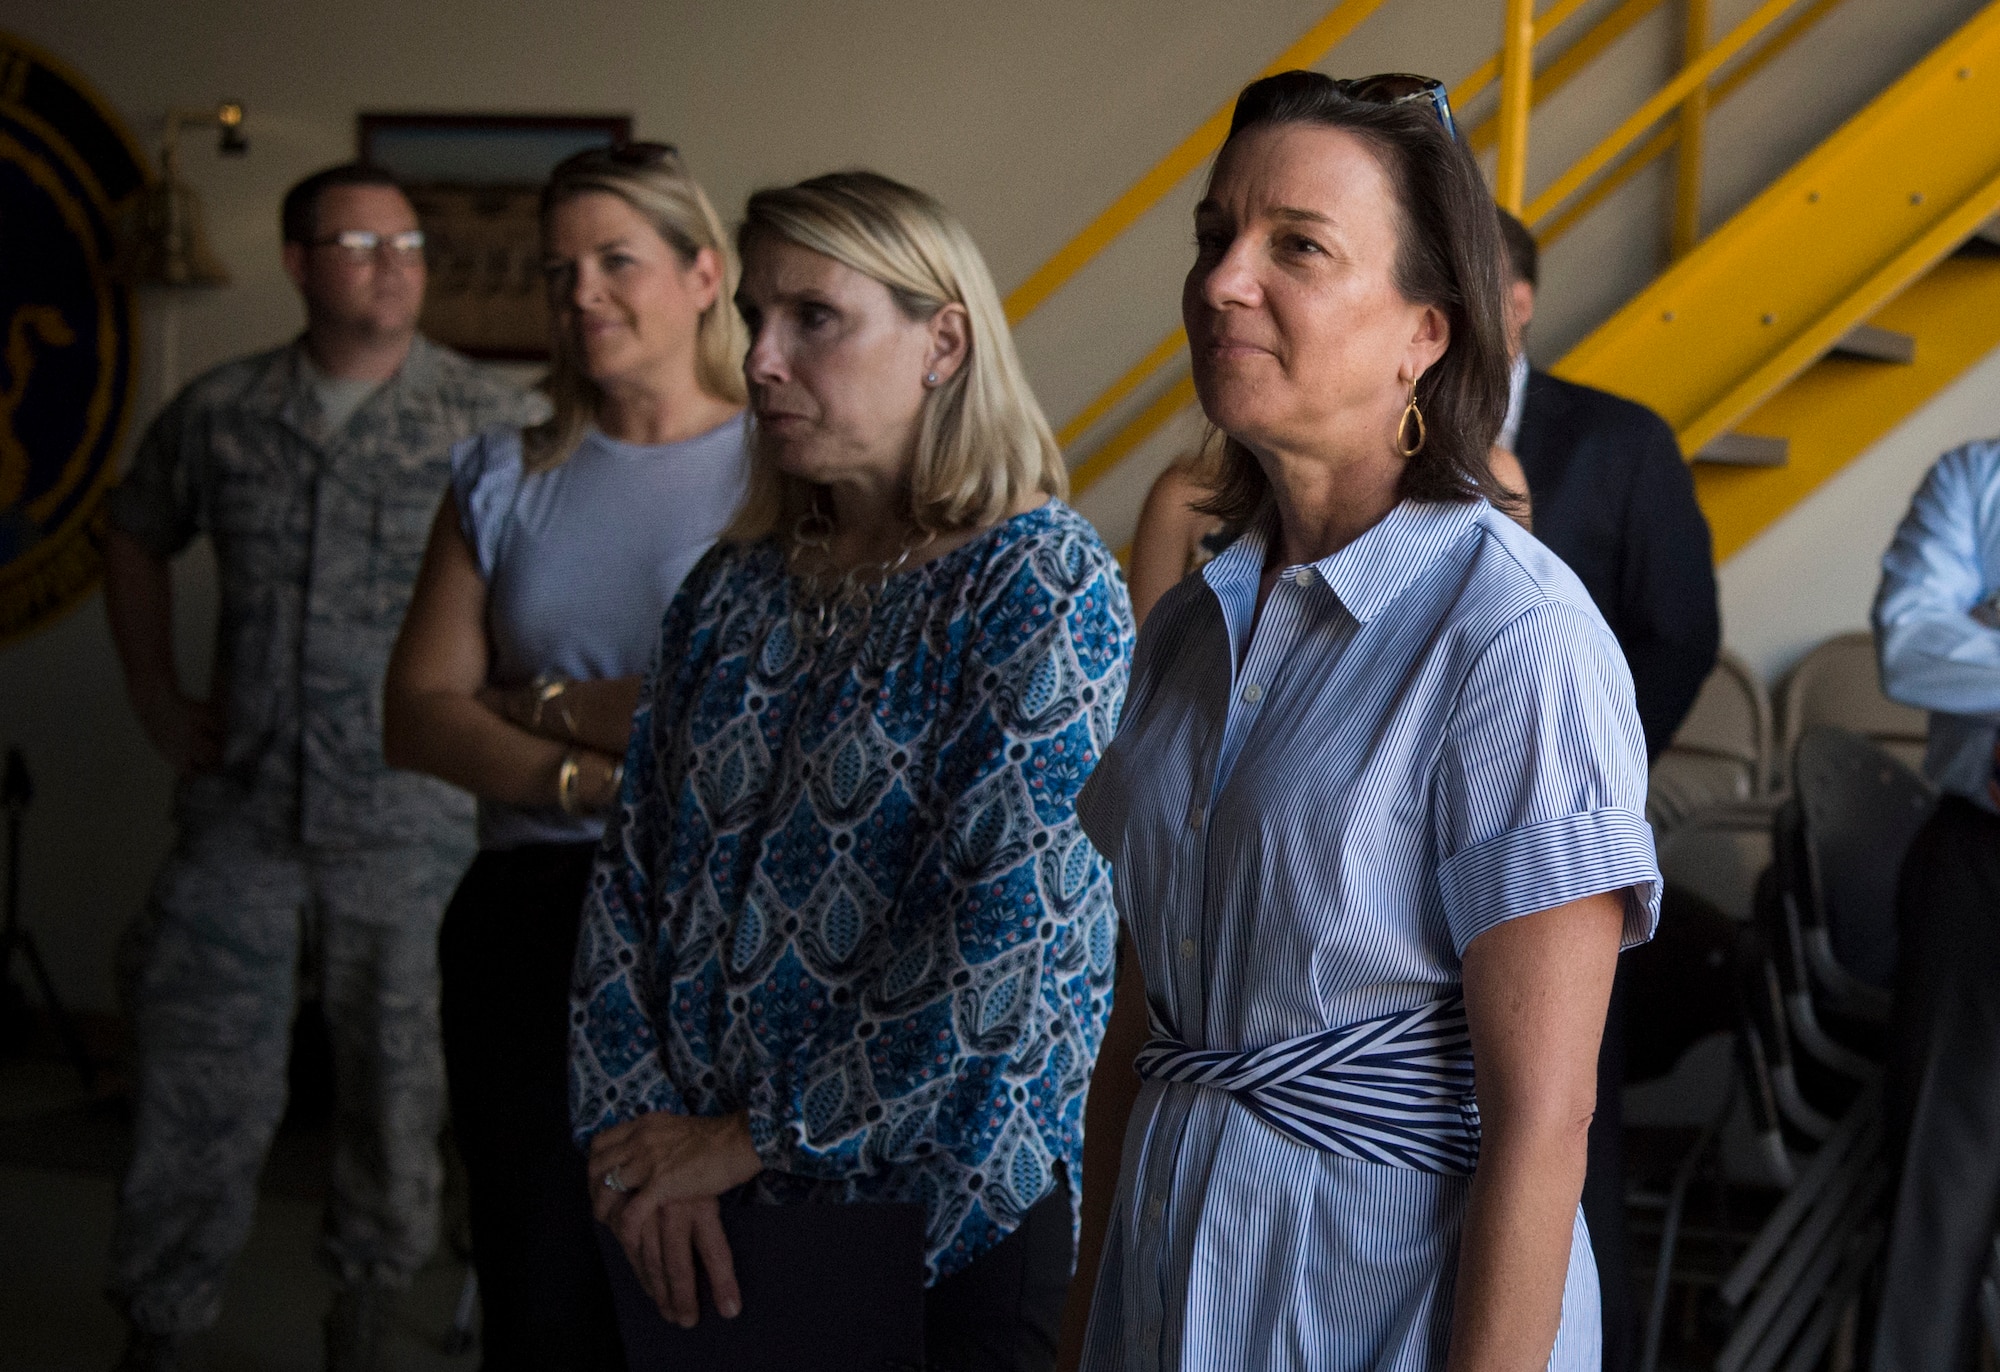 Right, Sara Holmes, wife of U.S. Air Force Gen. Mike Holmes, commander of Air Combat Command, attends a mission brief during a visit to the 363rd Intelligence Surveillance Reconnaissance Wing at Joint Base Langley-Eustis, Virginia, Sept. 5, 2018. Holmes visited various units within the 363rd ISRW to learn about its mission and Airmen. (U.S. Air Force photo by Staff Sgt. Areca T. Bell)